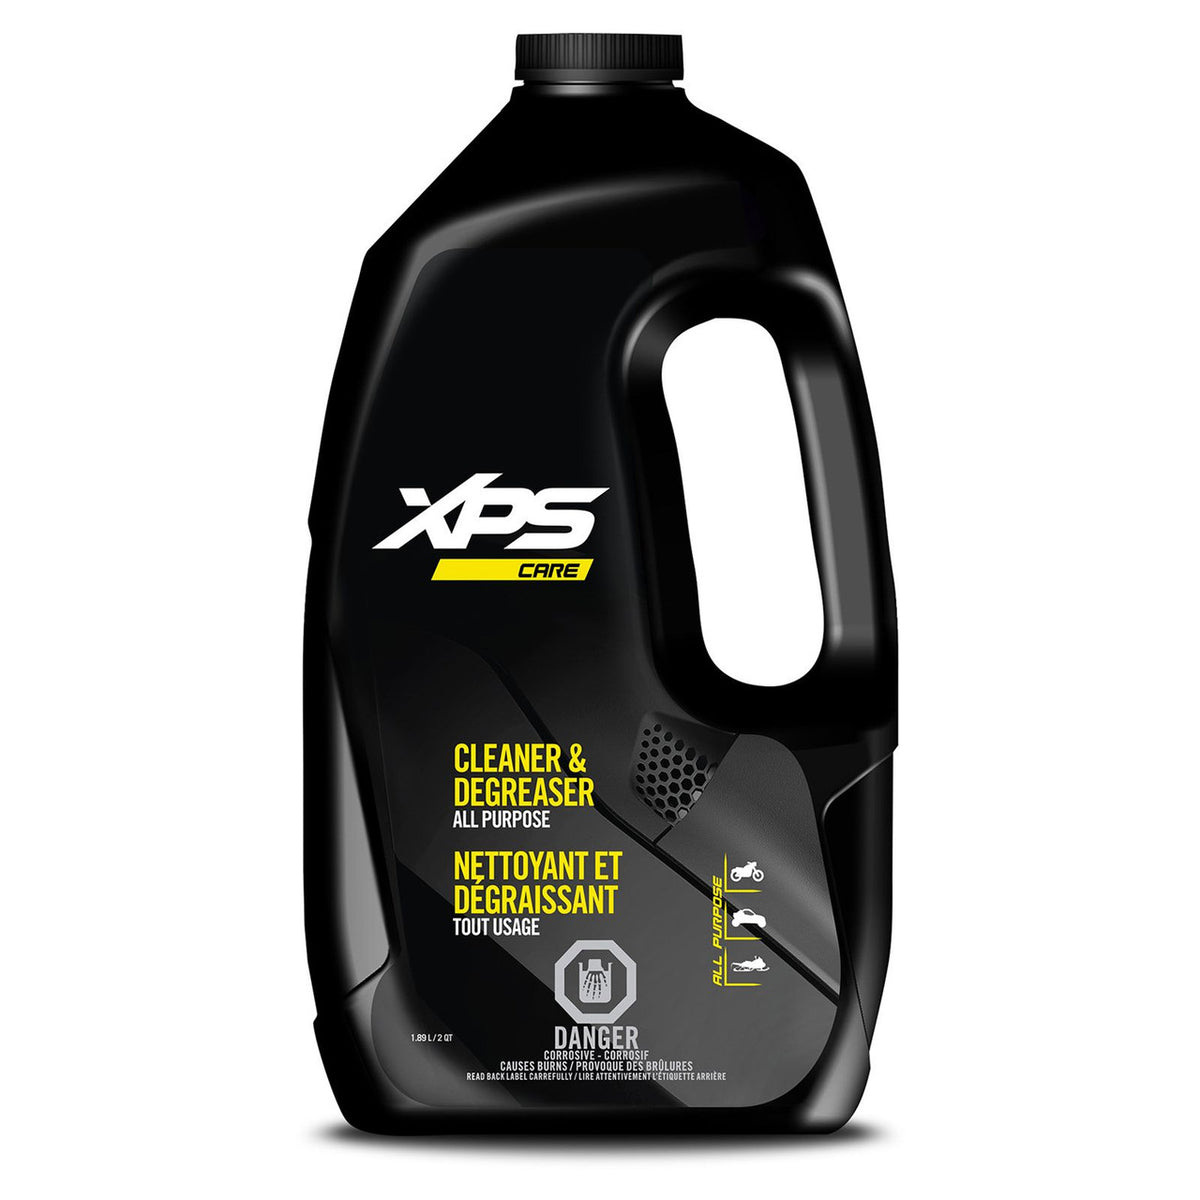 Ski-Doo All-Purpose Cleaner and Degreaser